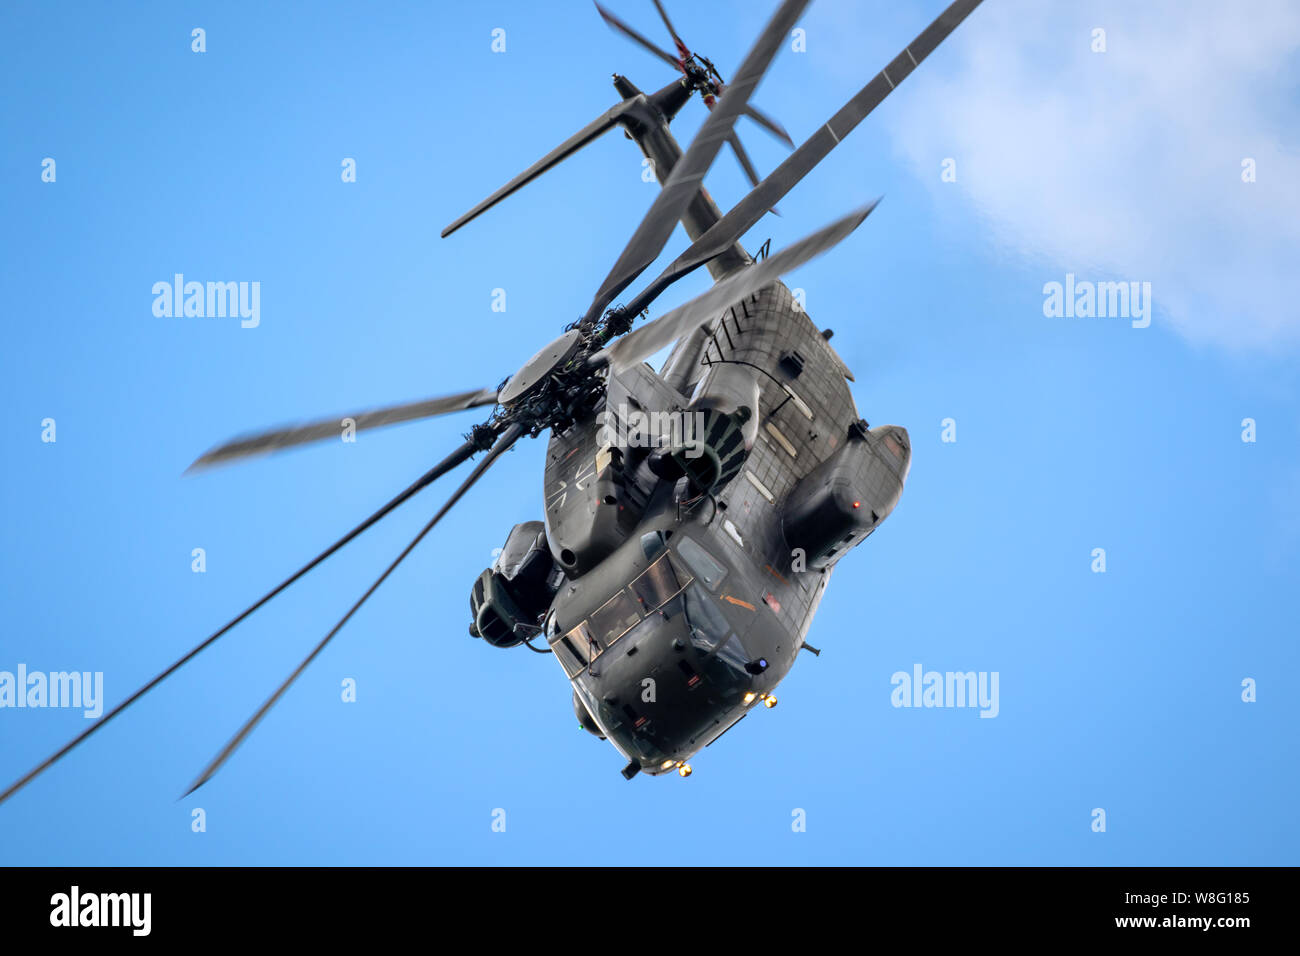 JAGEL, GERMANY - JUN 13, 2019: German Army Sikorsky CH-53 Stallion transport helicopter performing at the Tag der Bundeswehr. Stock Photo